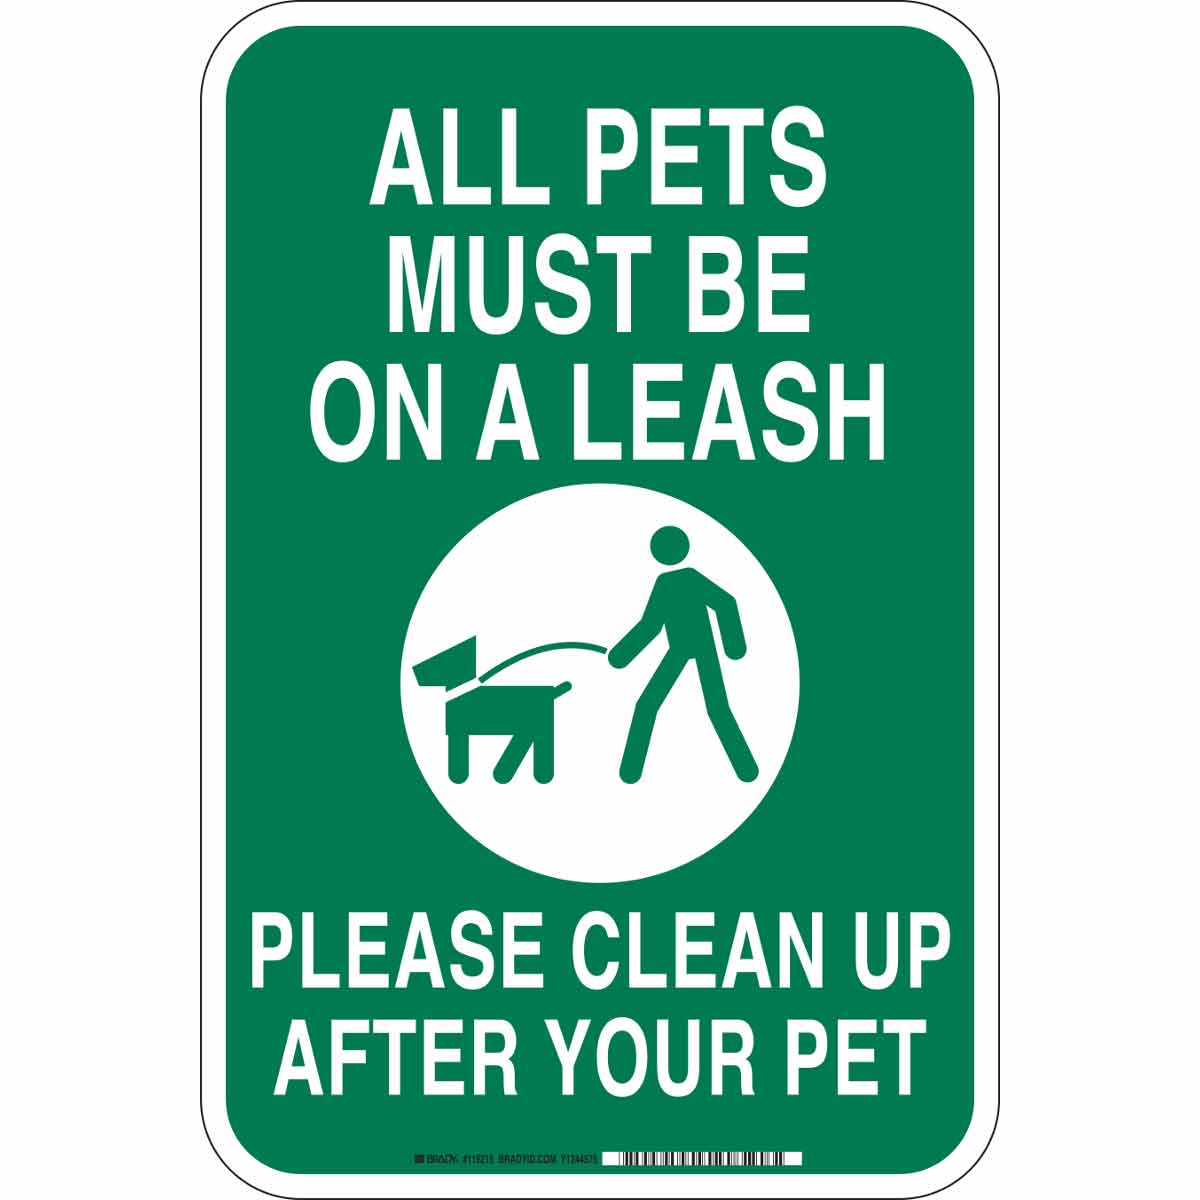 White on Blue All Pets Must Be on Leash and Clean Up After Your Pet Warning 18 x 12 Inches Dog Leash Sign Rust Free Aluminum Indoor Outdoor Public Signage 